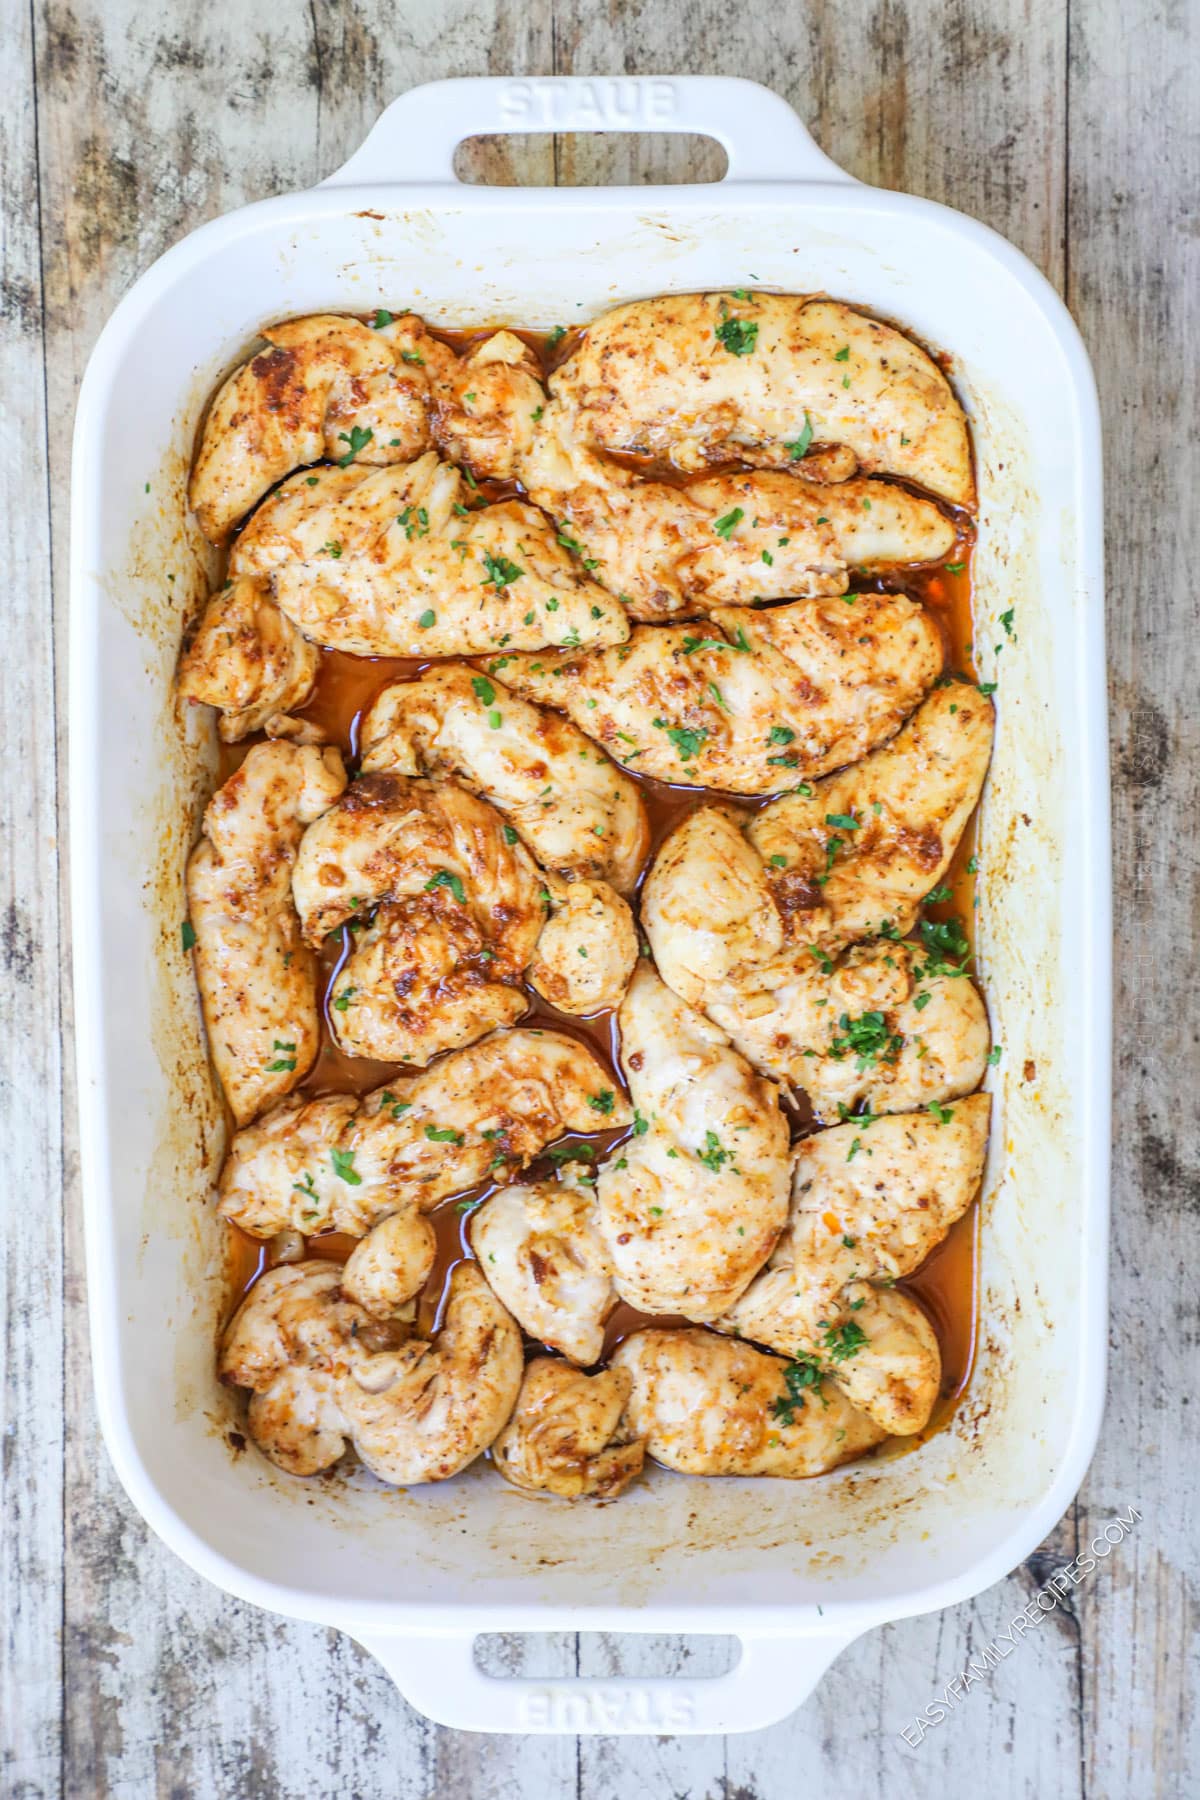 A white casserole dish full of Oven baked chicken tenders with no breading.